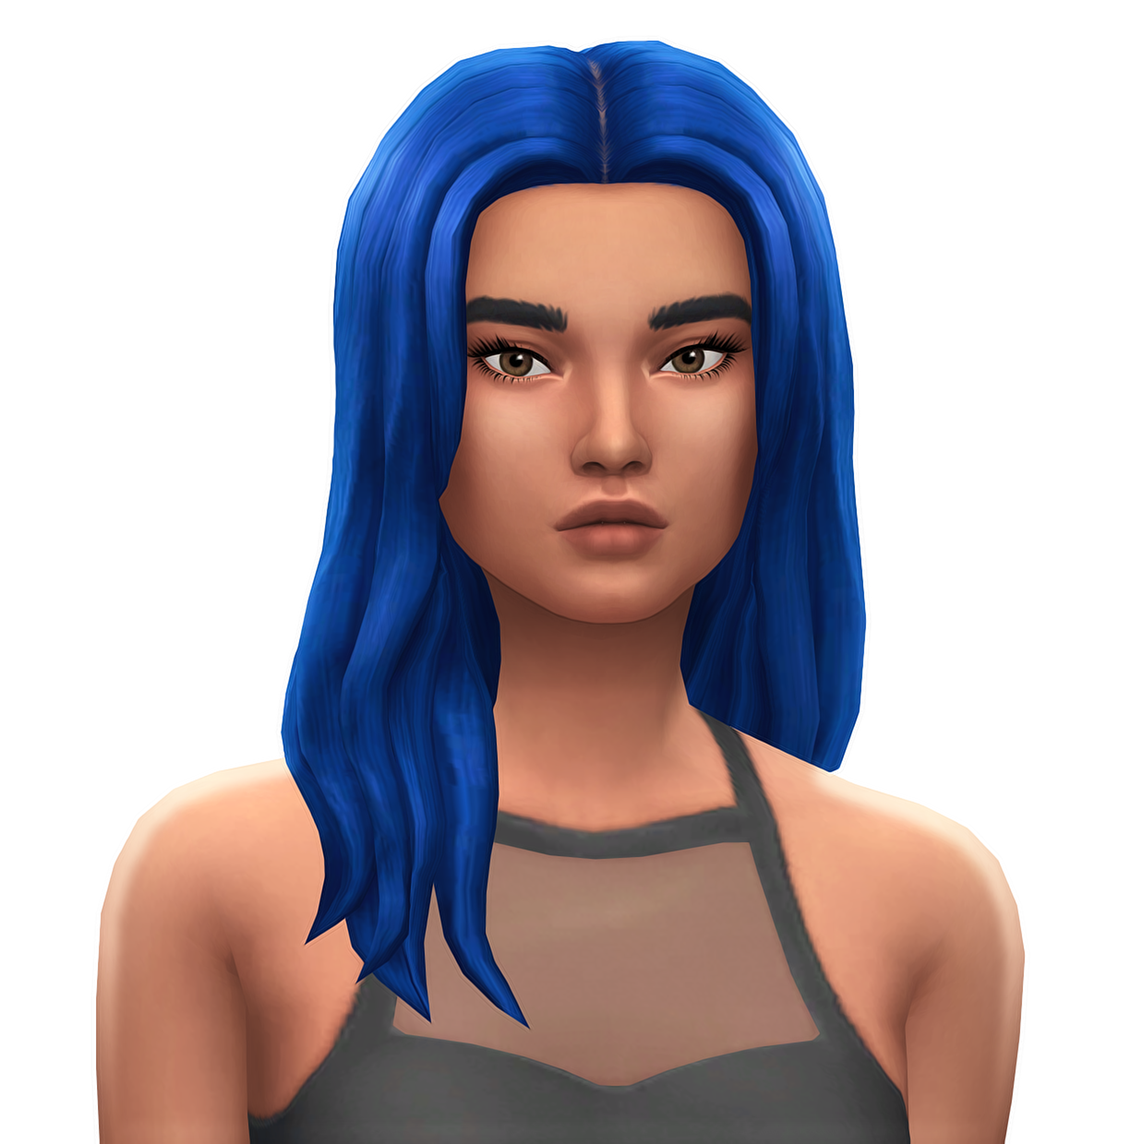 Download Nebula Hair - The Sims 4 Mods - CurseForge